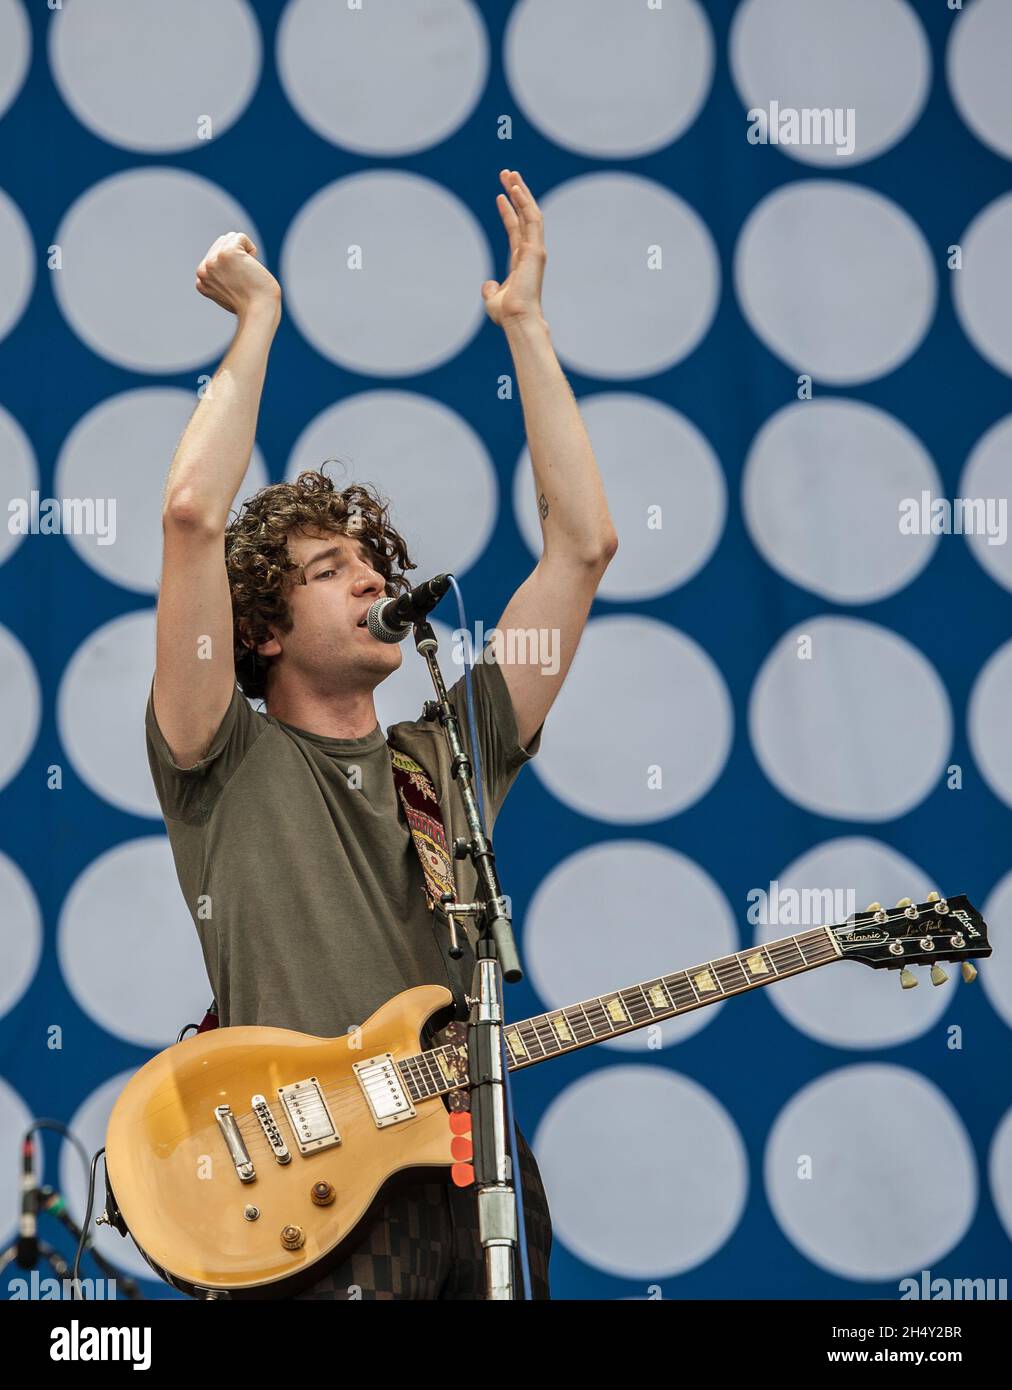 Luke Pritchard of The Kooks performs on stage on day 1 of V Festival on August 22 2015 at Weston Park, Staffordshire, UK Stock Photo